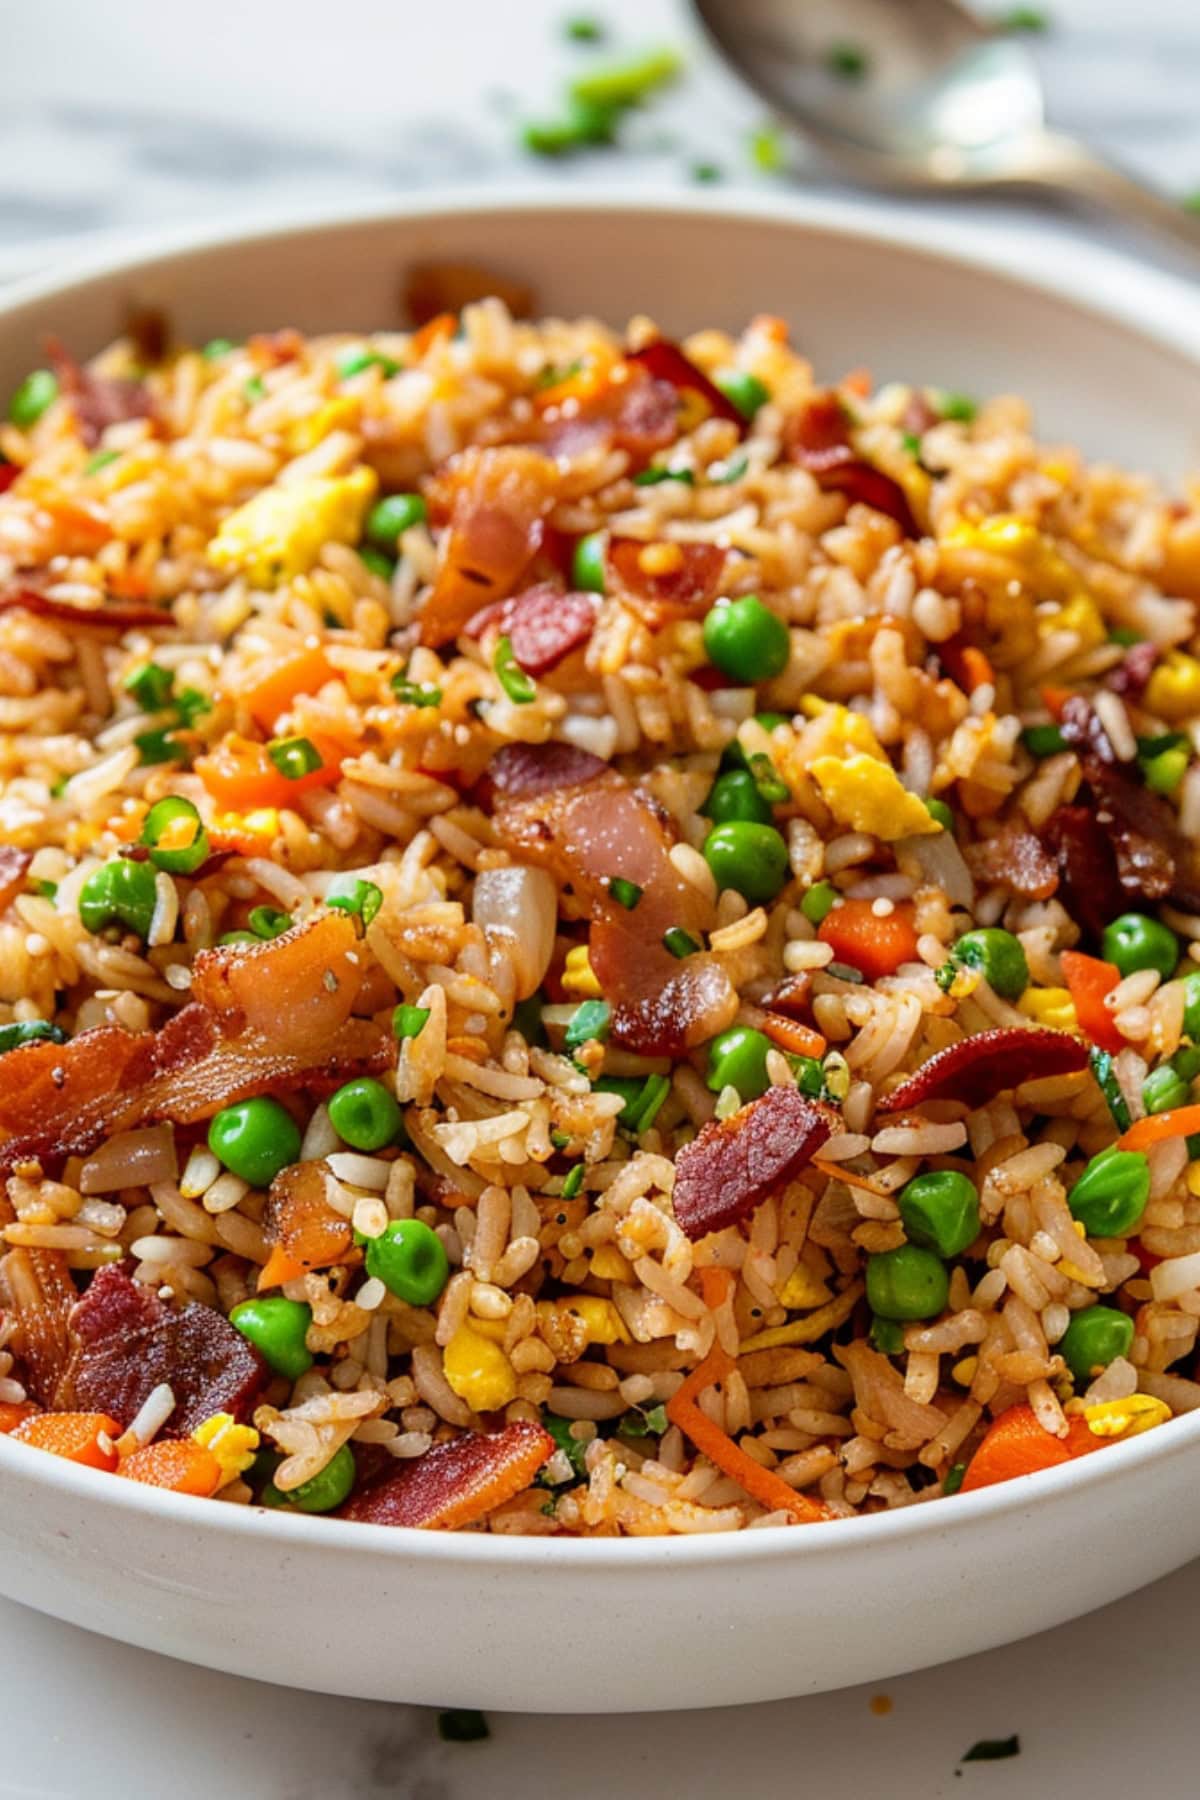 Fried rice mixed with bacon, green peas, carrots, egg and soy sauce